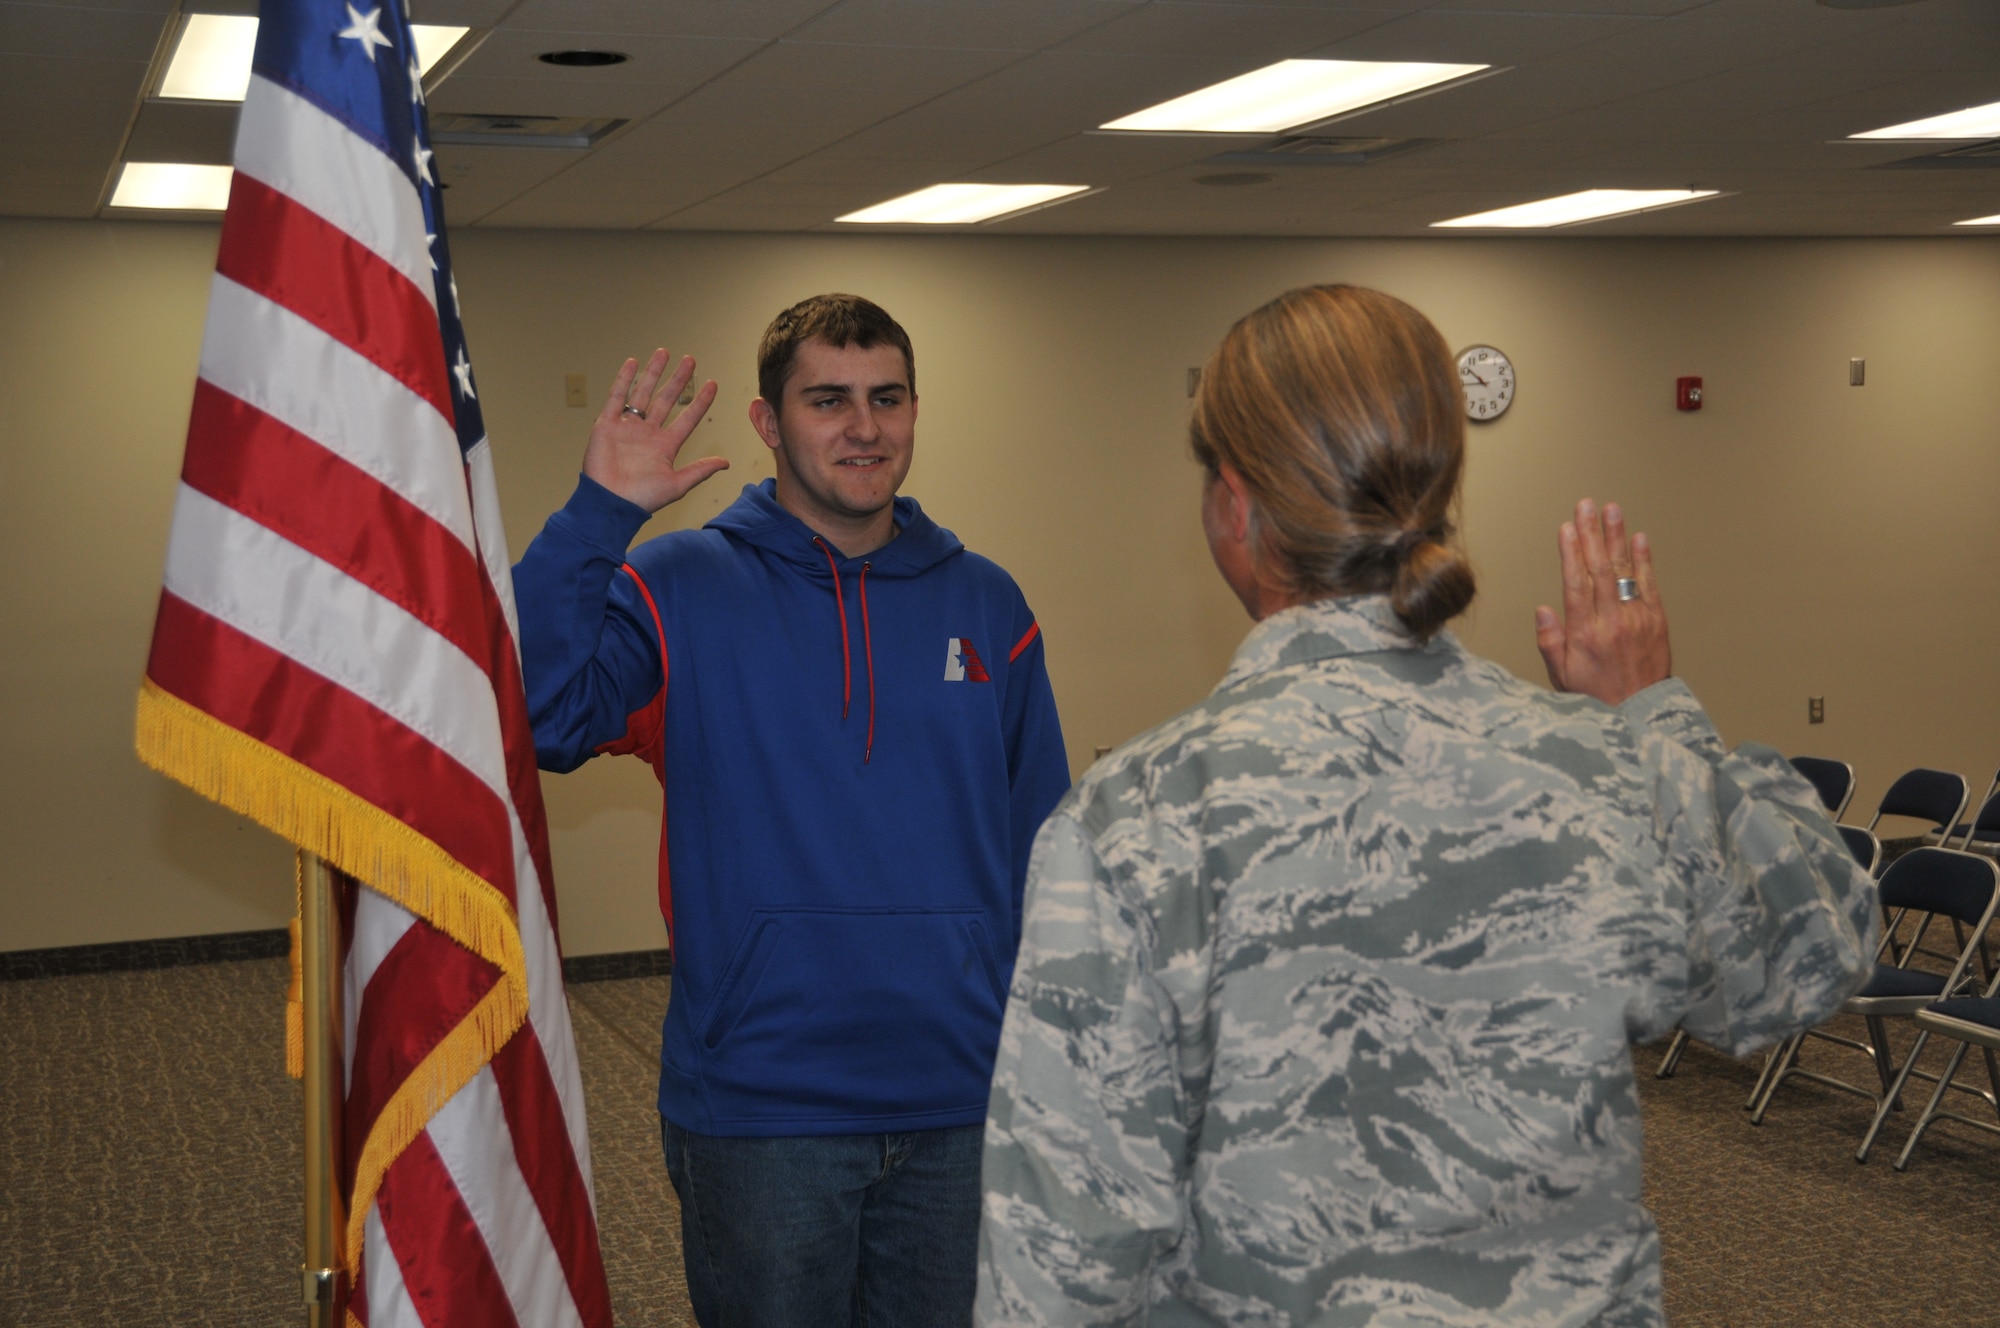 120th Logistics Readiness Squadron Commander Lt. Col. Jennifer Cinq-Mars administers the oath of enlistment to Eric Fletcher in the Larsen Room of the 120th Airlift Wing Headquarters Building on Oct. 30, 2015. (U.S. Air National Guard photo by Senior Master Sgt. Eric Peterson/Released)